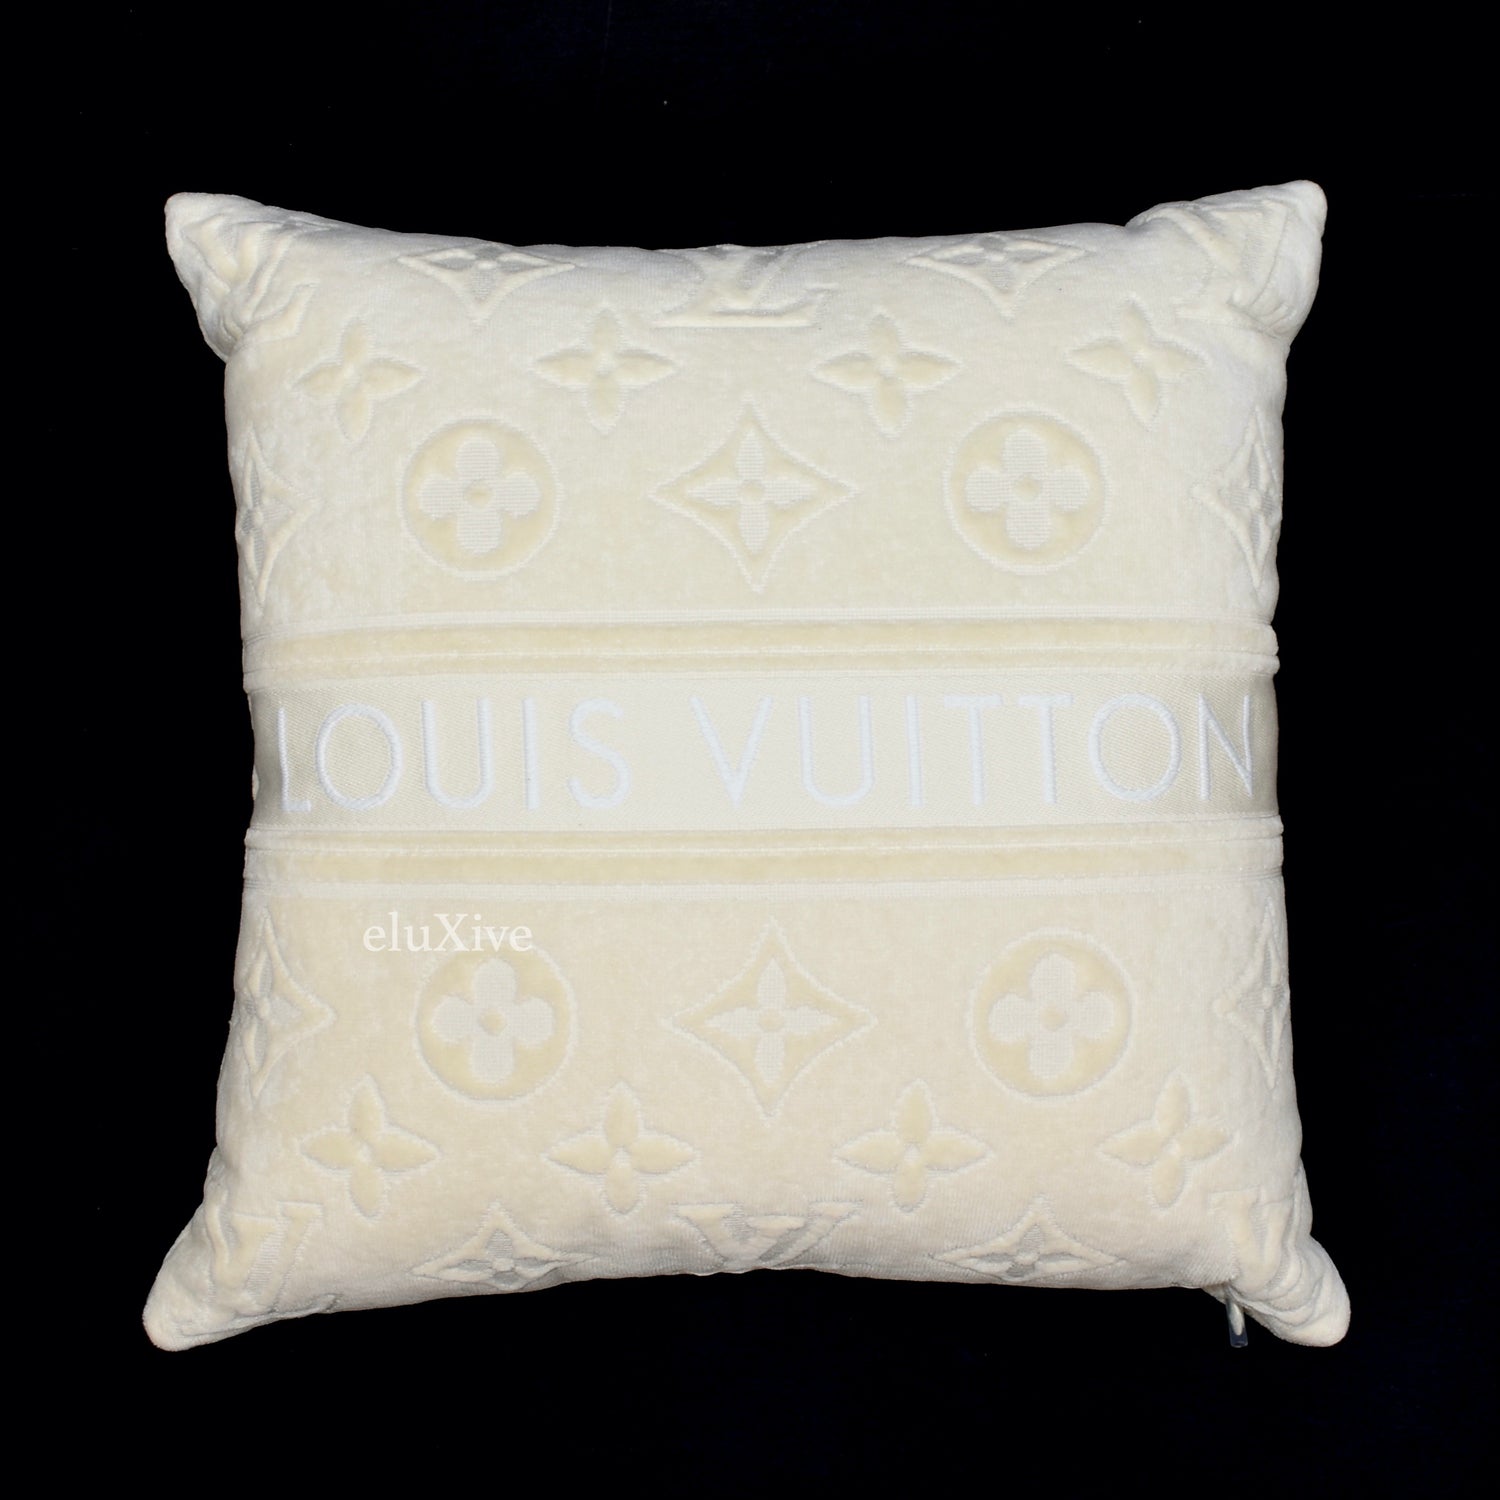 LOUIS VUITTON PILLOW COLLECTION, LV NEW RELEASES